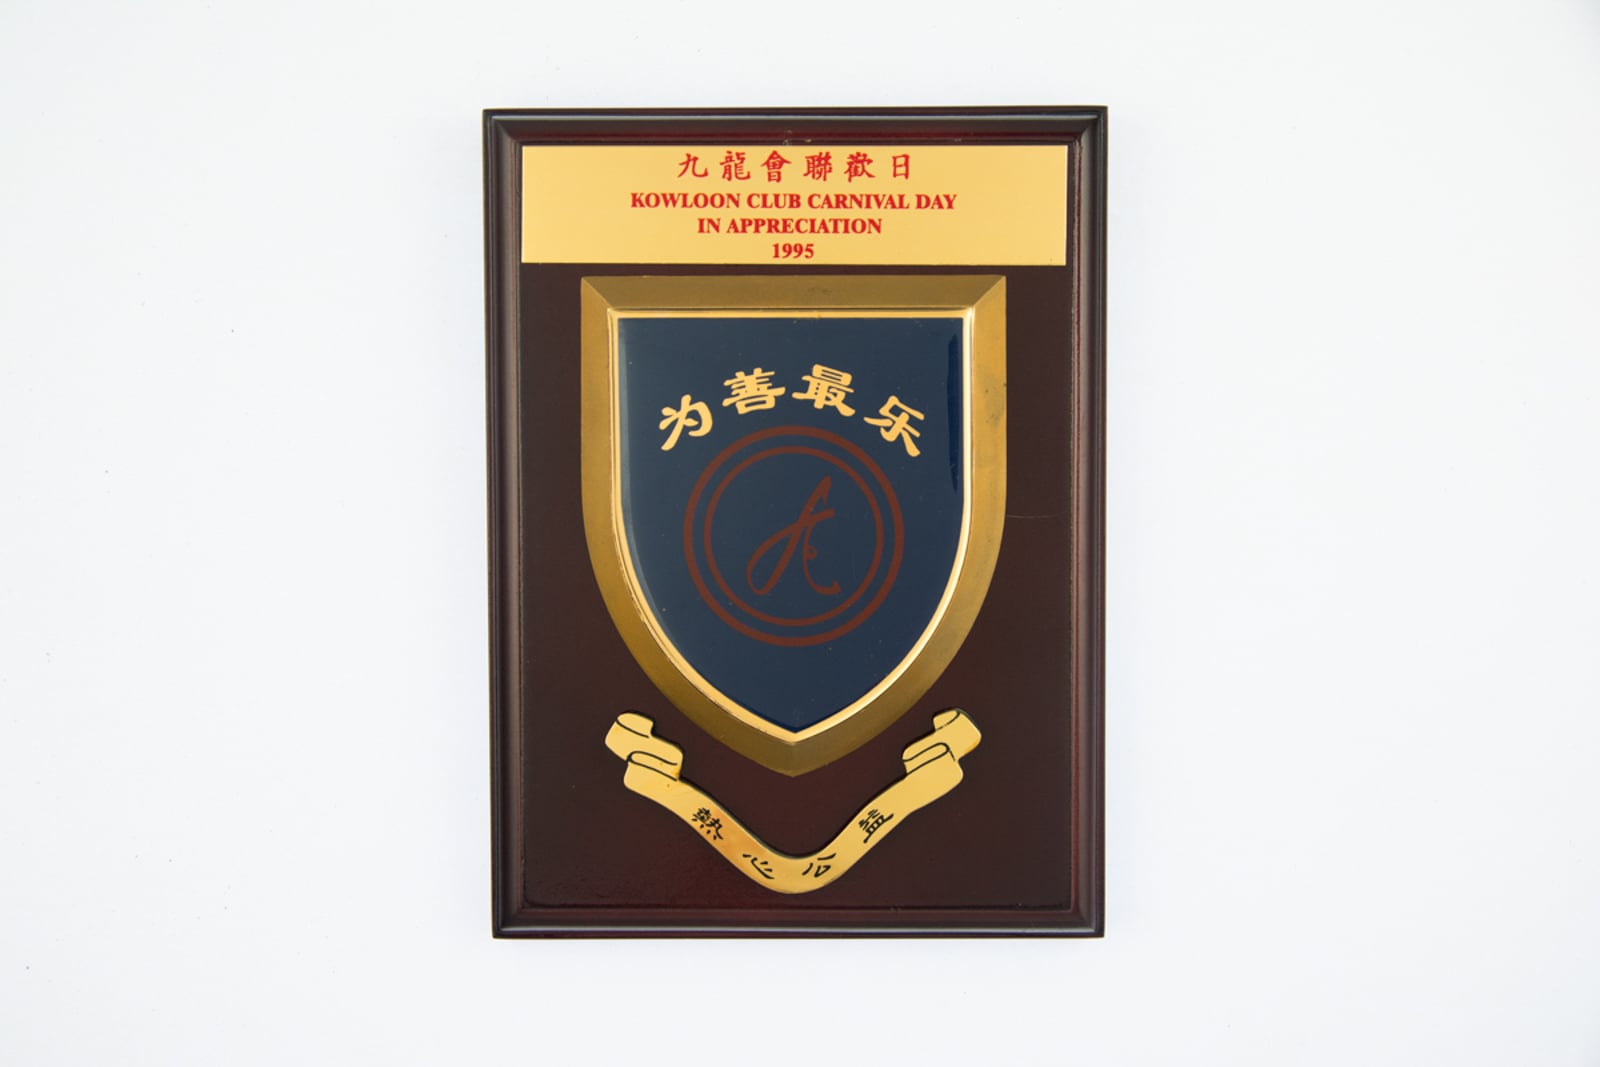 Kowloon Club Carnival Day Plaque 1995